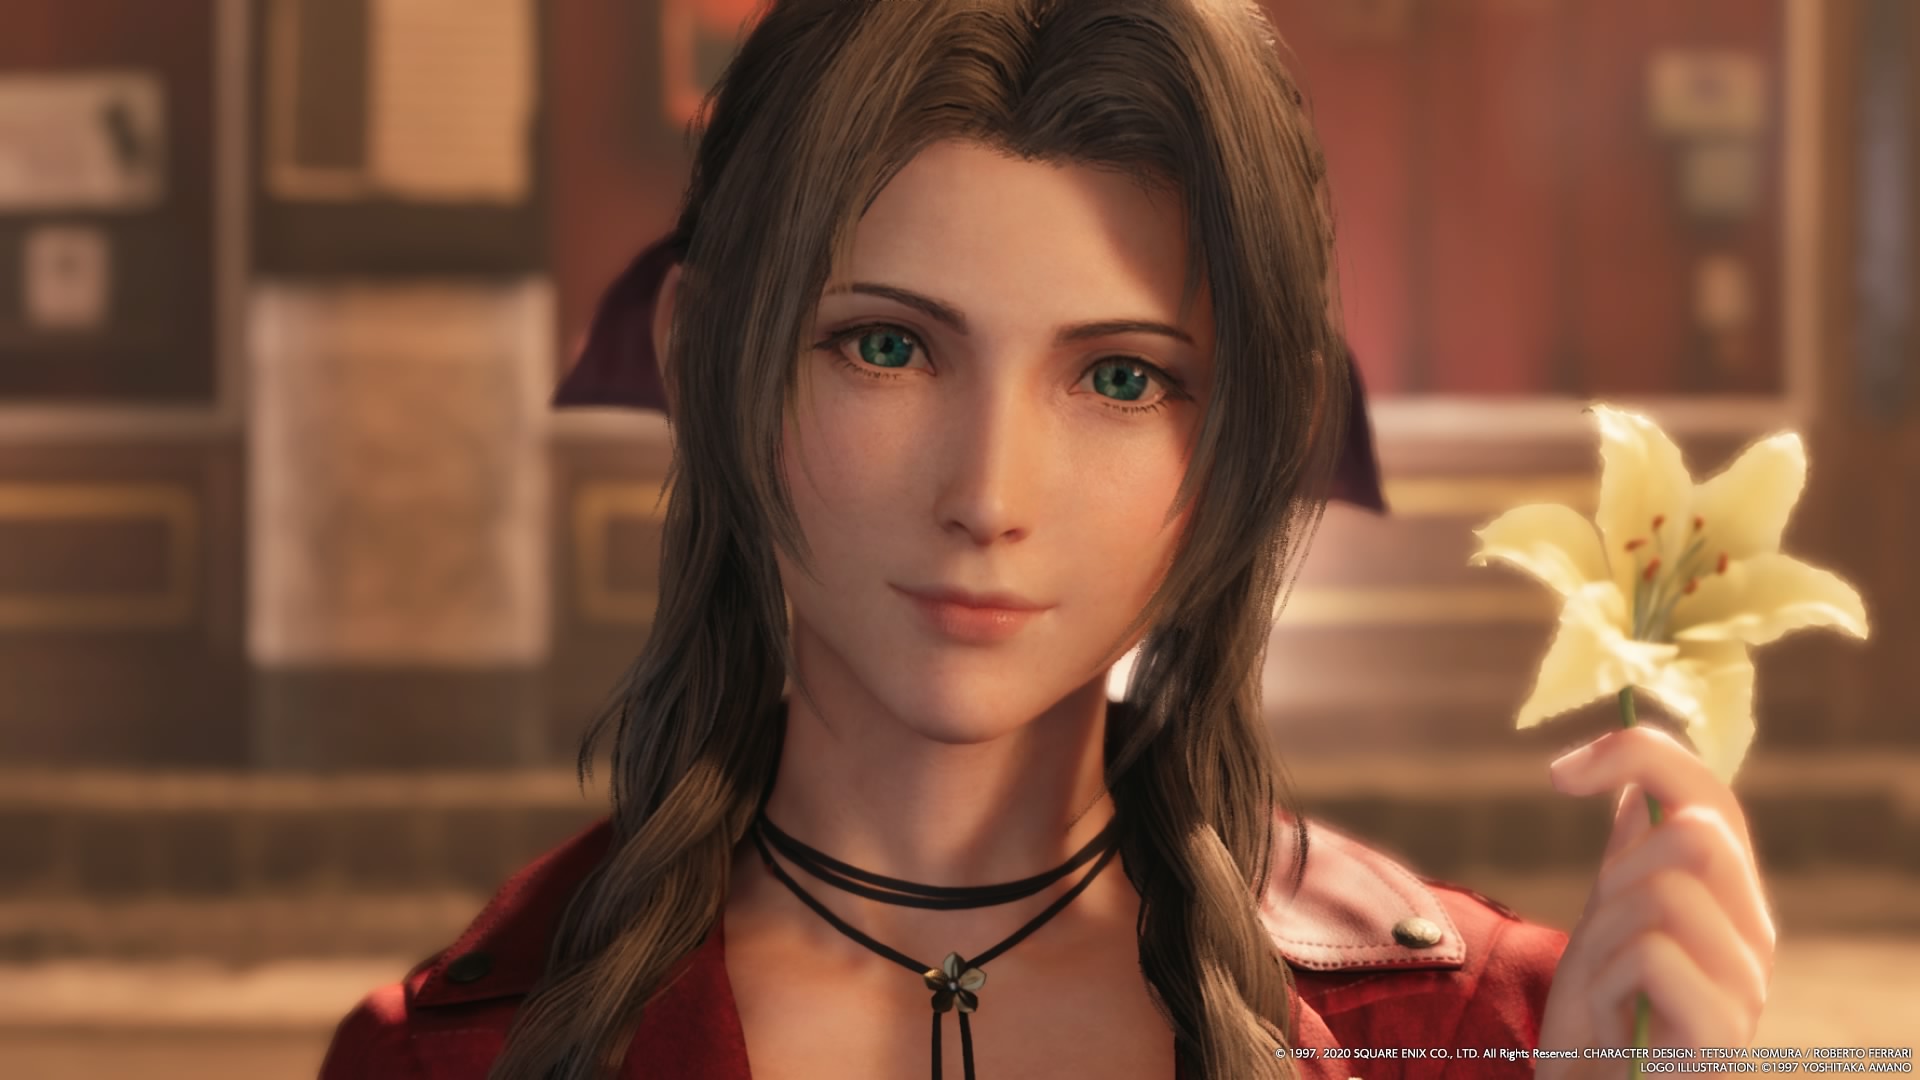 Final Fantasy VII Remake's Aerith Is Kind and Even More Enigmatic